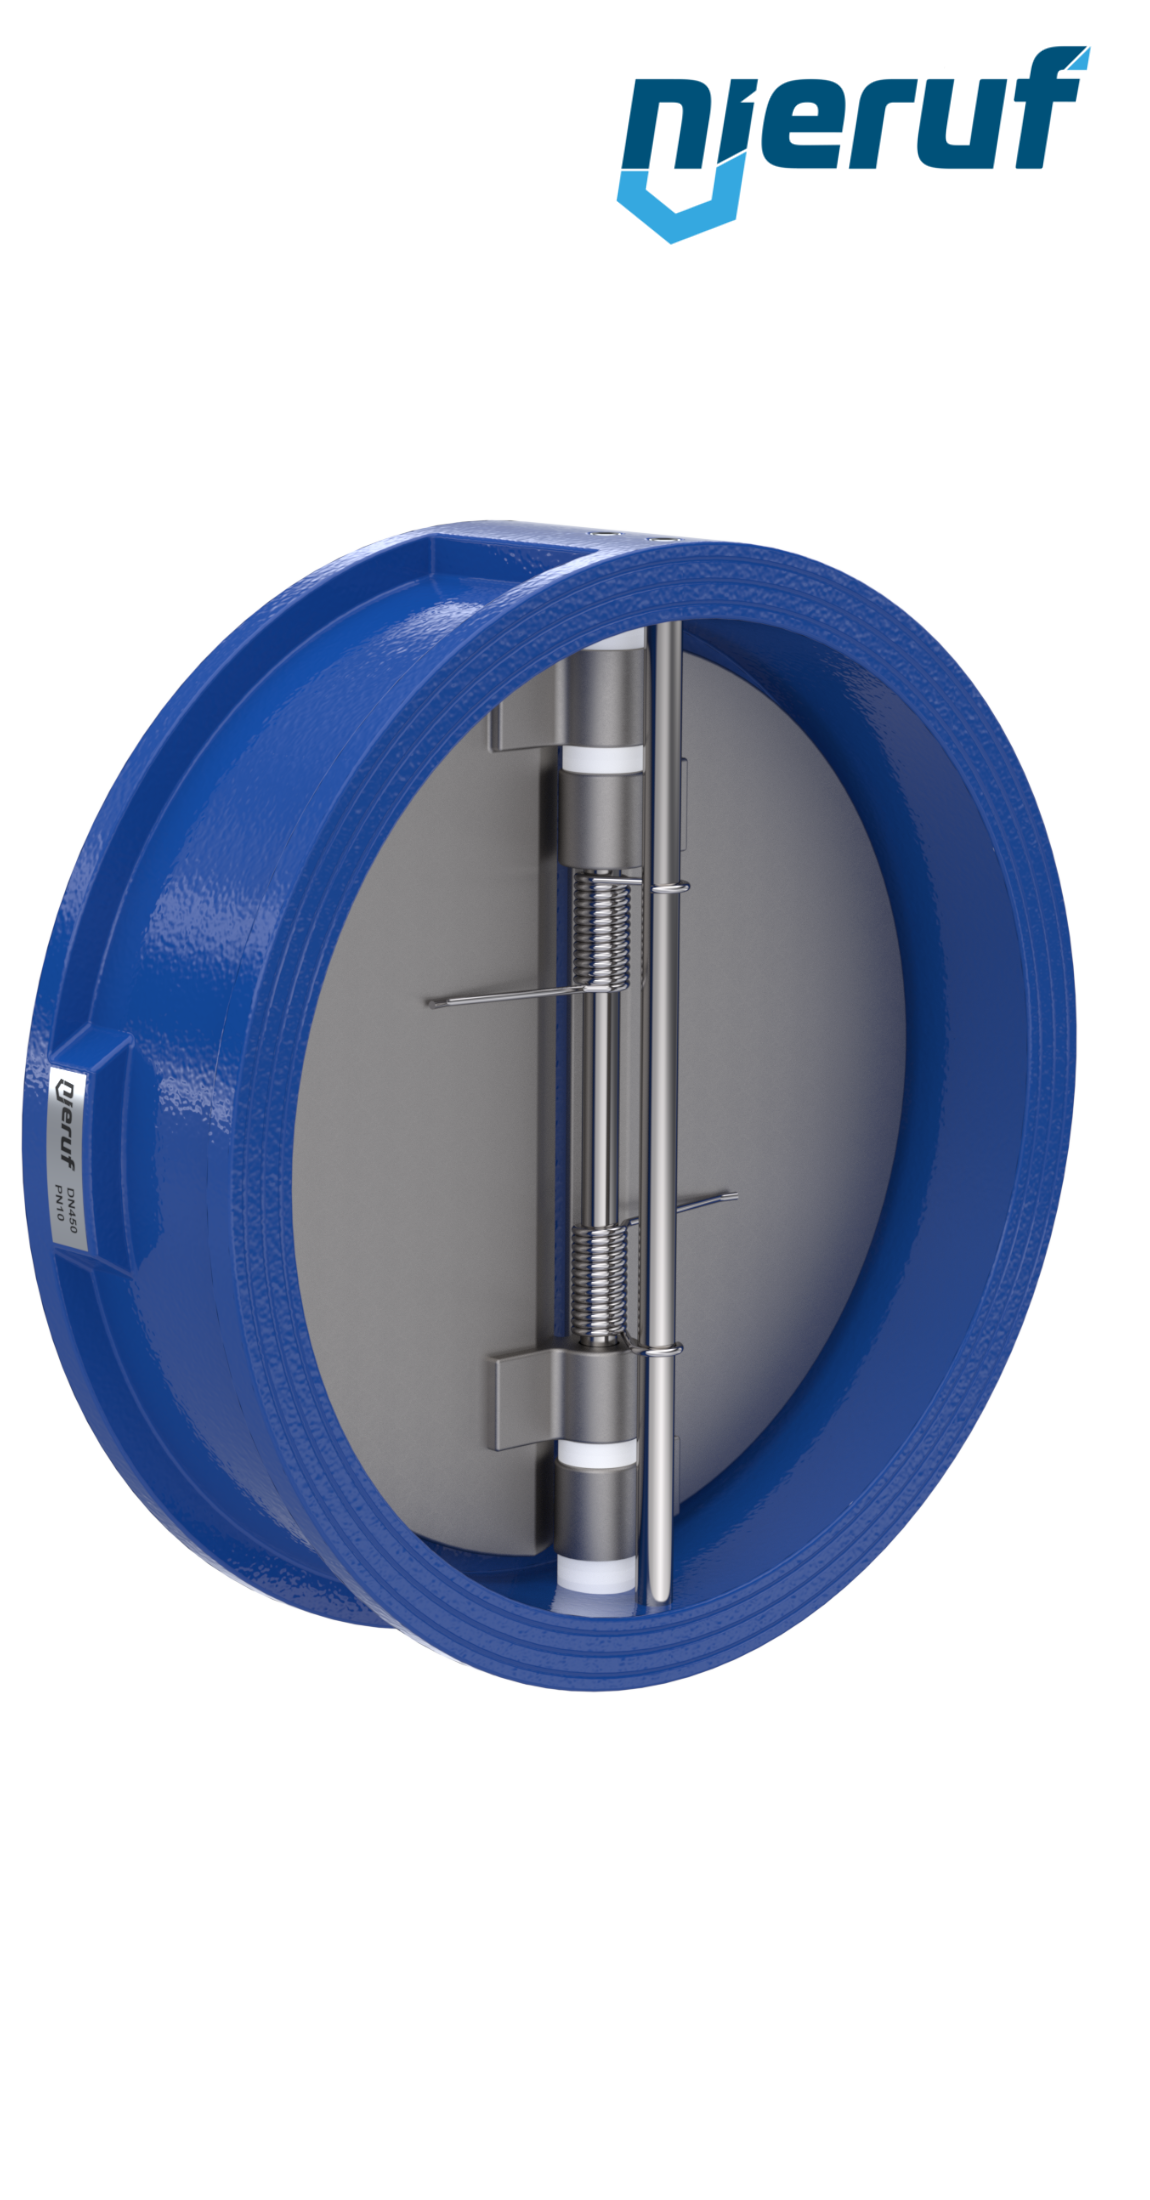 dual plate check valve DN450 DR02 ANSI 150 GGG40 epoxyd plated blue 180µm EPDM